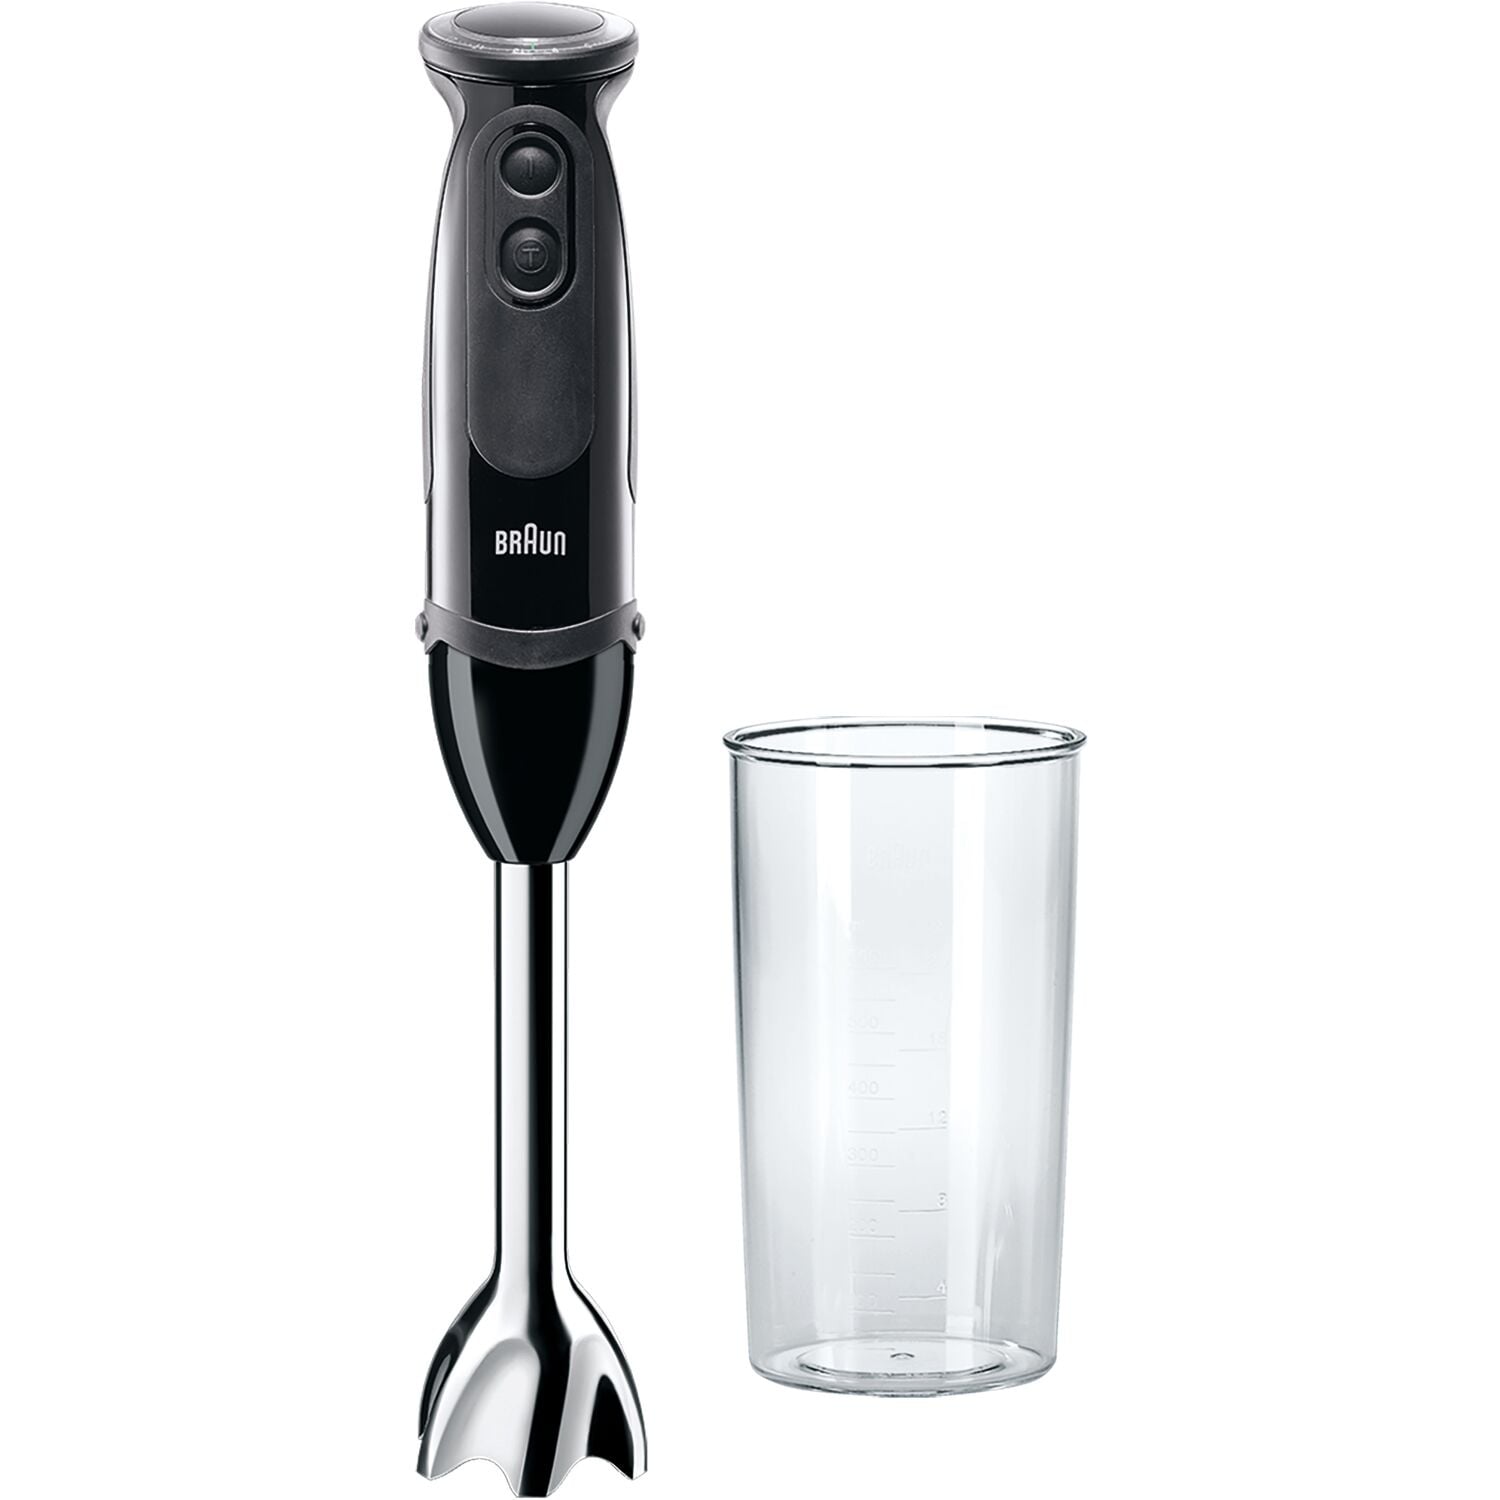 https://ak1.ostkcdn.com/images/products/is/images/direct/2d2fce22d5873fee222554e0dee68bc11dc26f67/Braun-MultiQuick-5-Vario-Hand-Blender-with-21-Speeds.jpg